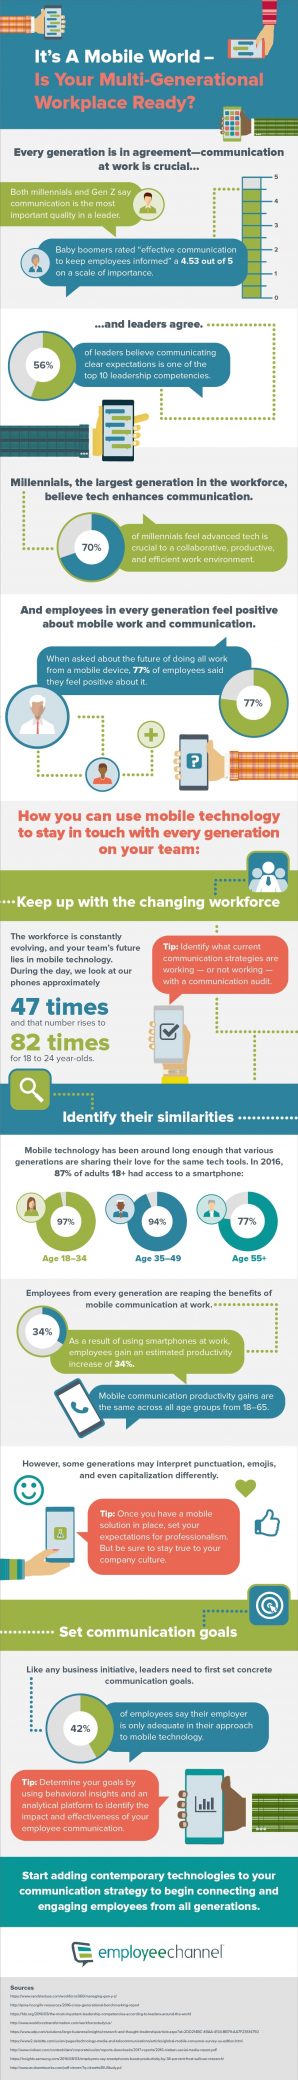 Let’s Chat Generations: How to Communicate Via Mobile with Your Team at Work